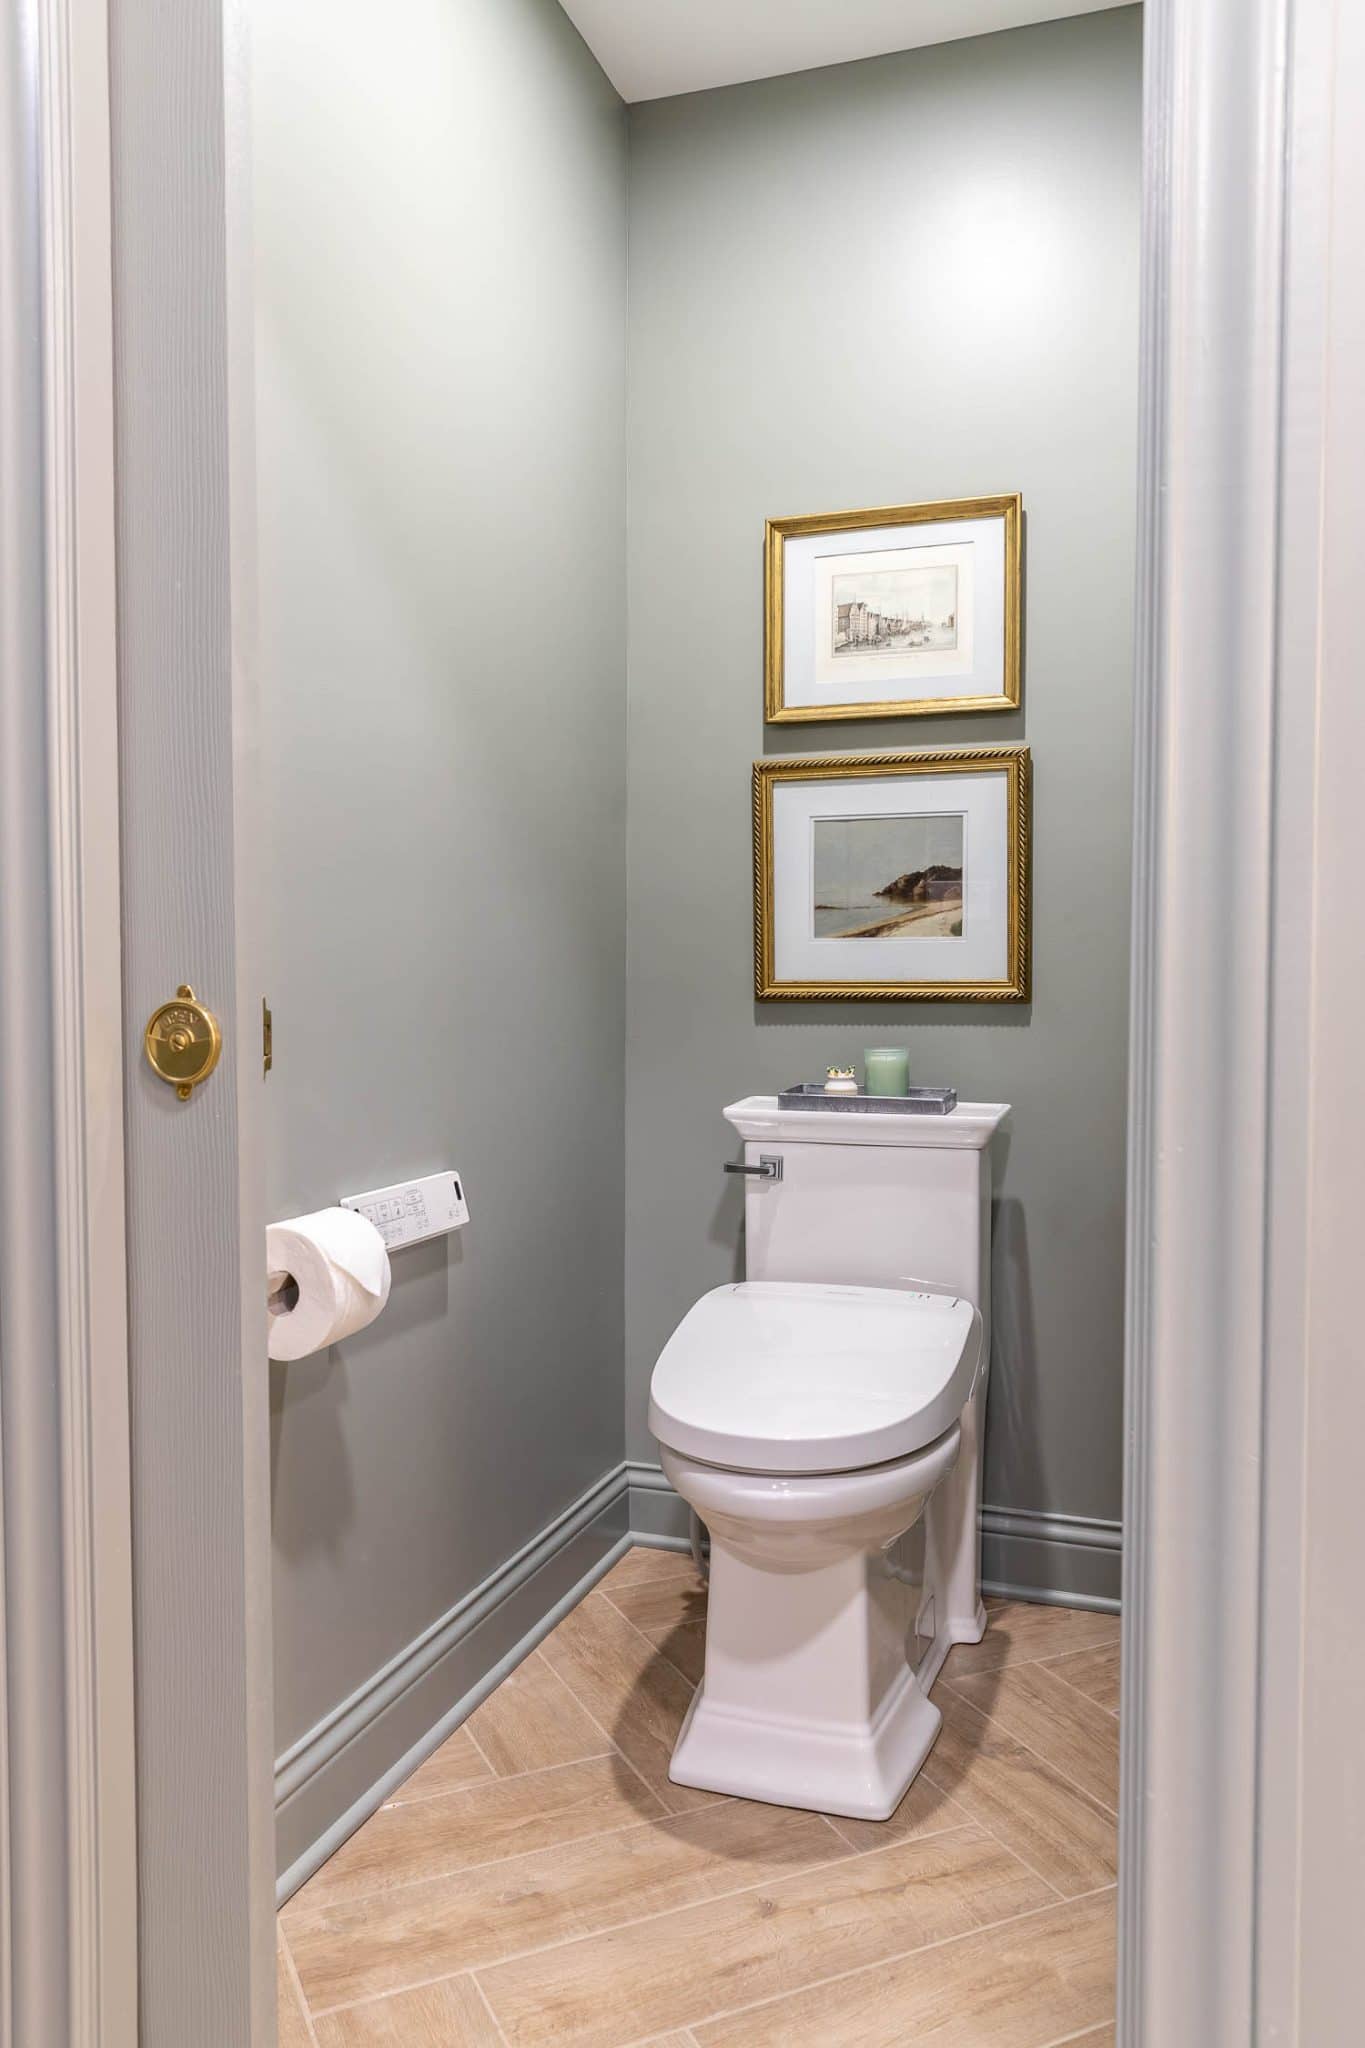 How To Install A Toilet And Bidet Seat